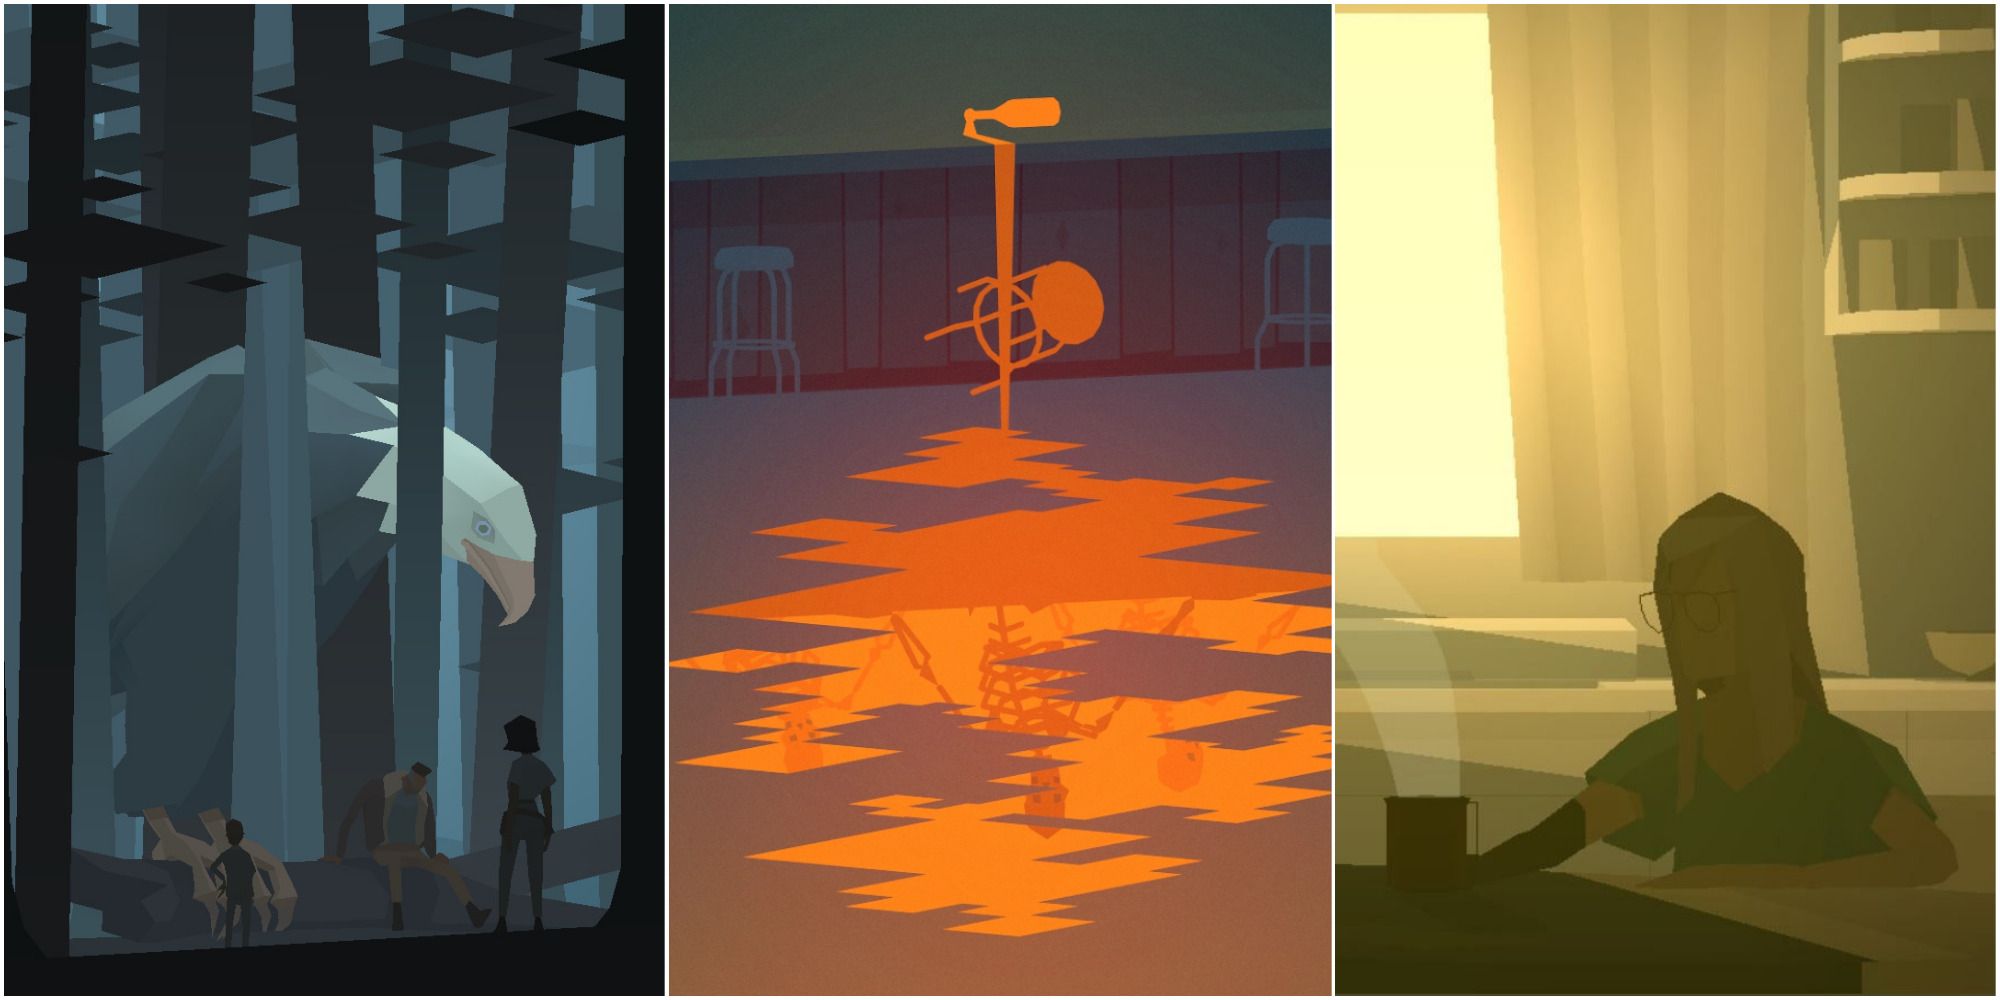 A collage of three images from Kentucky Route Zero, showing a giant eagle, a spilled beer bottle, and a woman drinking coffee